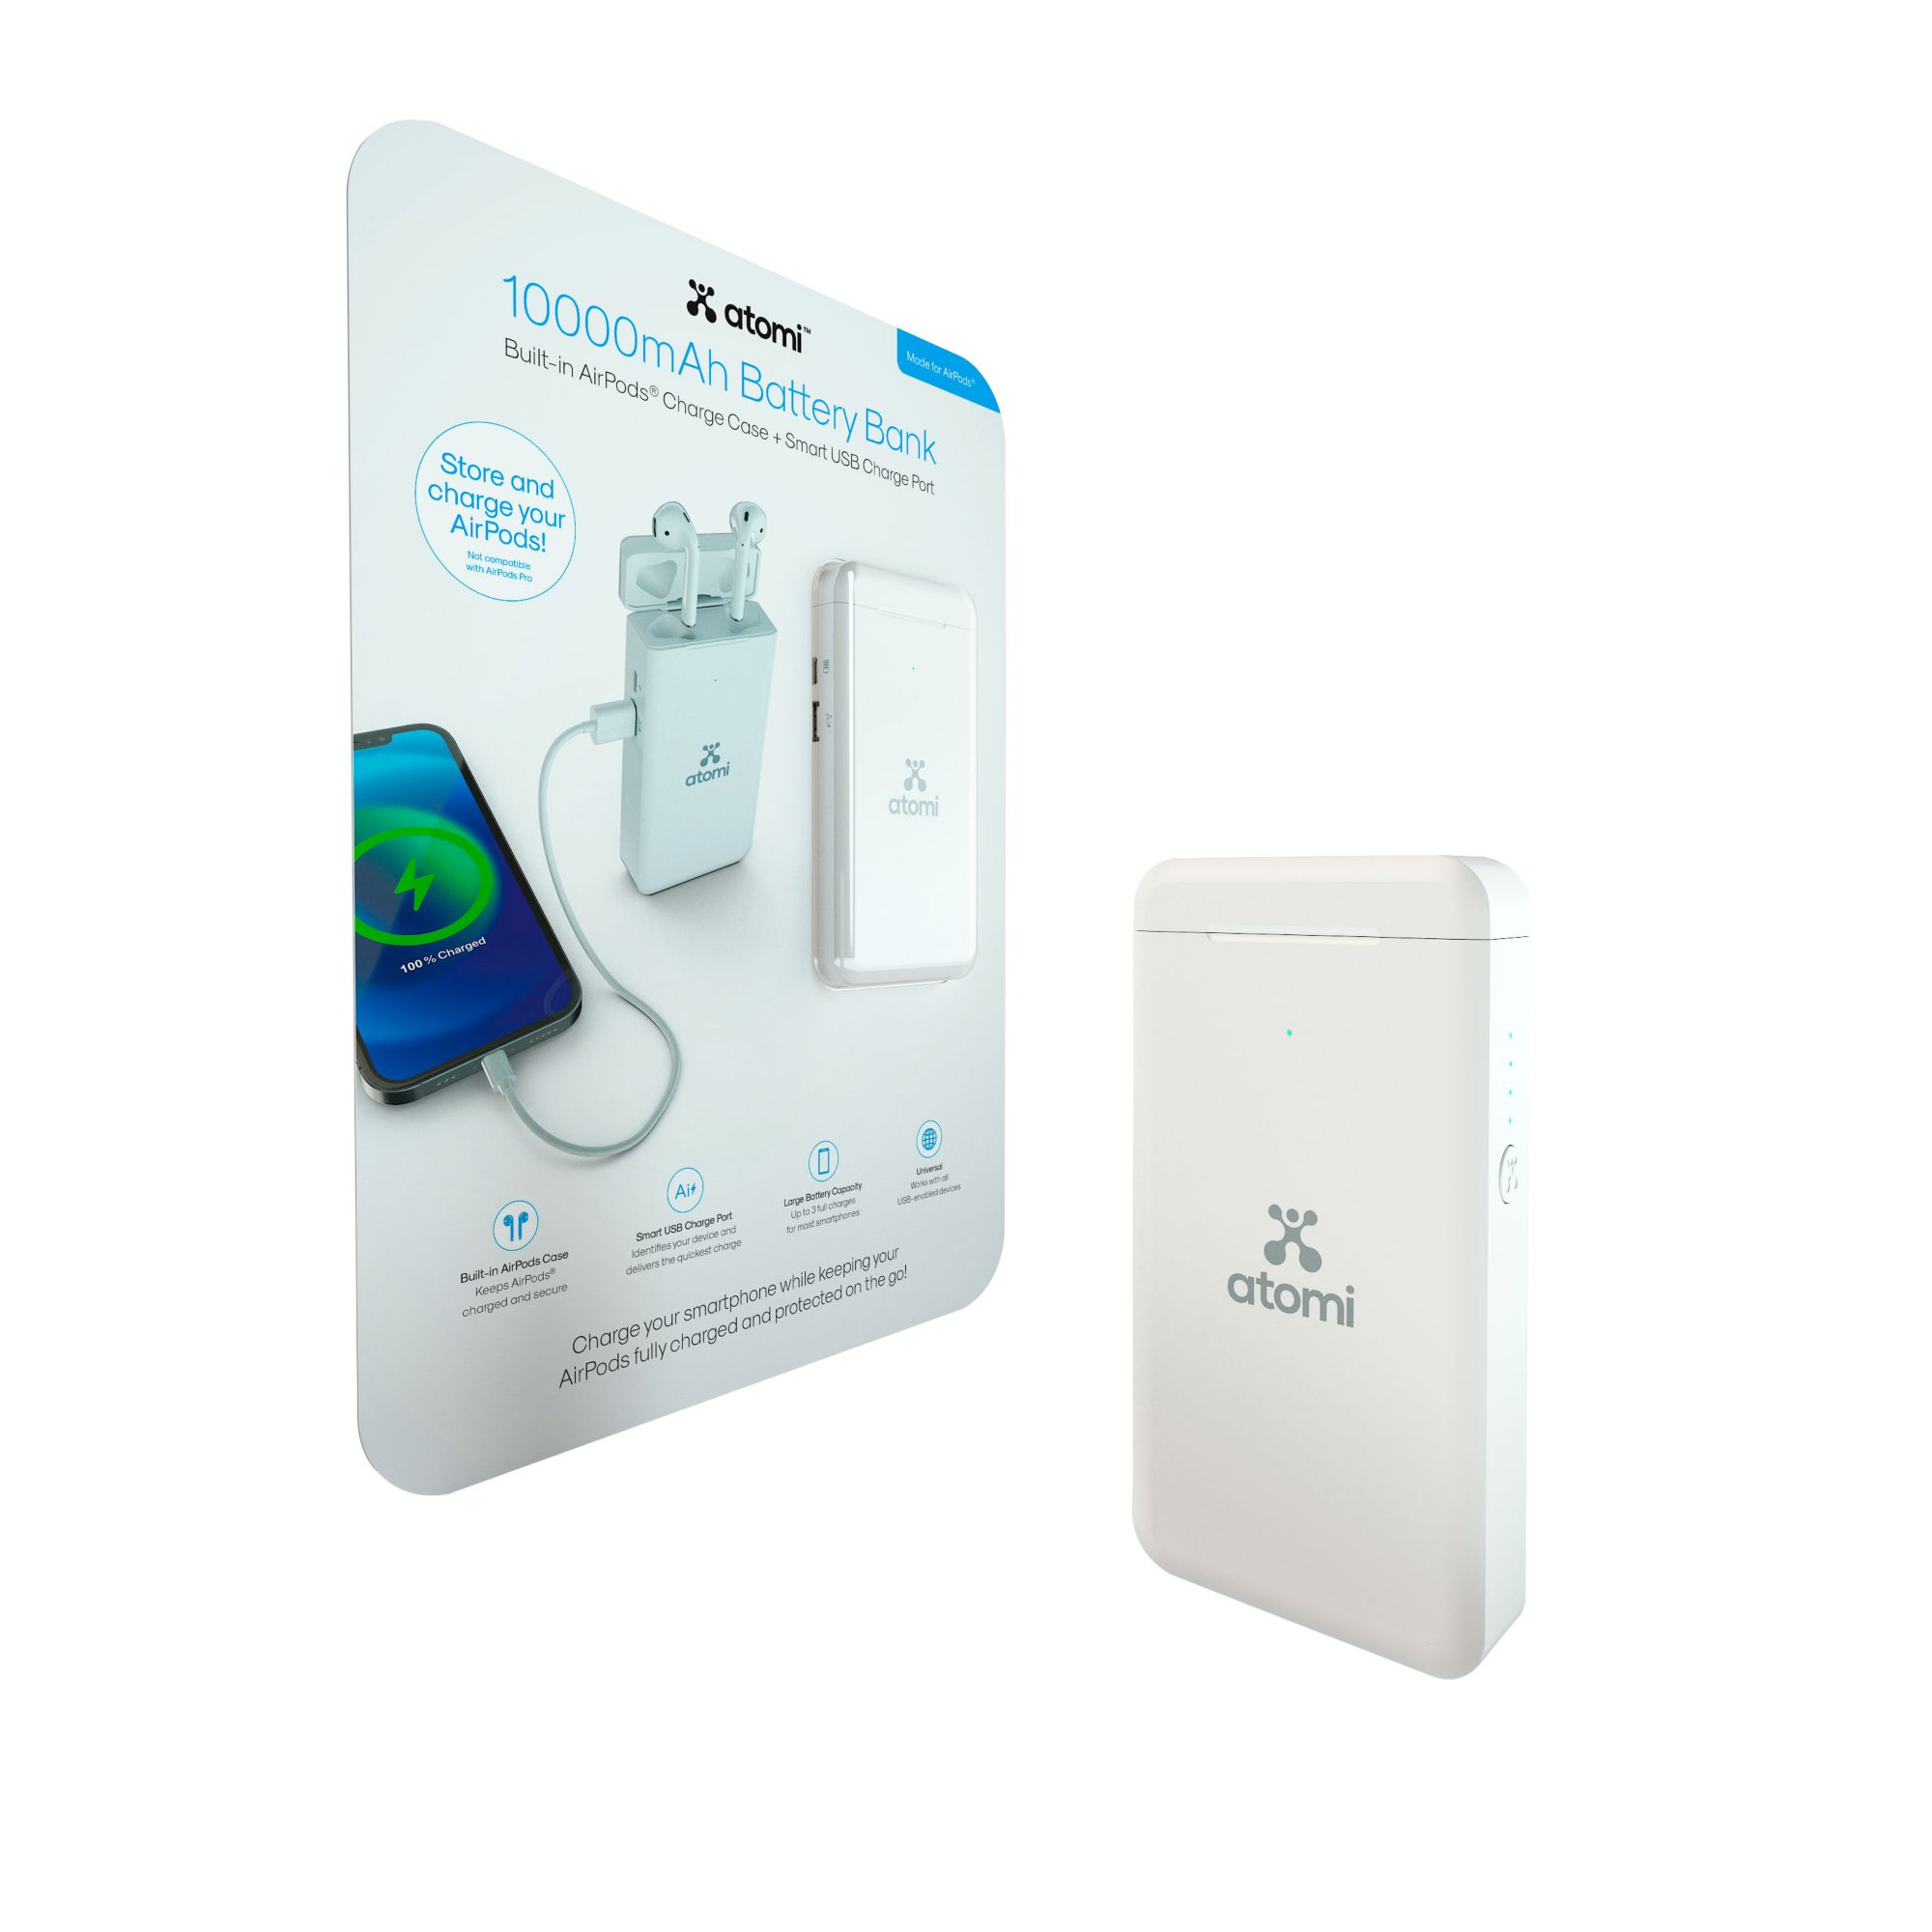 Atomi 10000mAh Battery Bank with Built-In AirPods Charge Case and Smart USB Charge Port